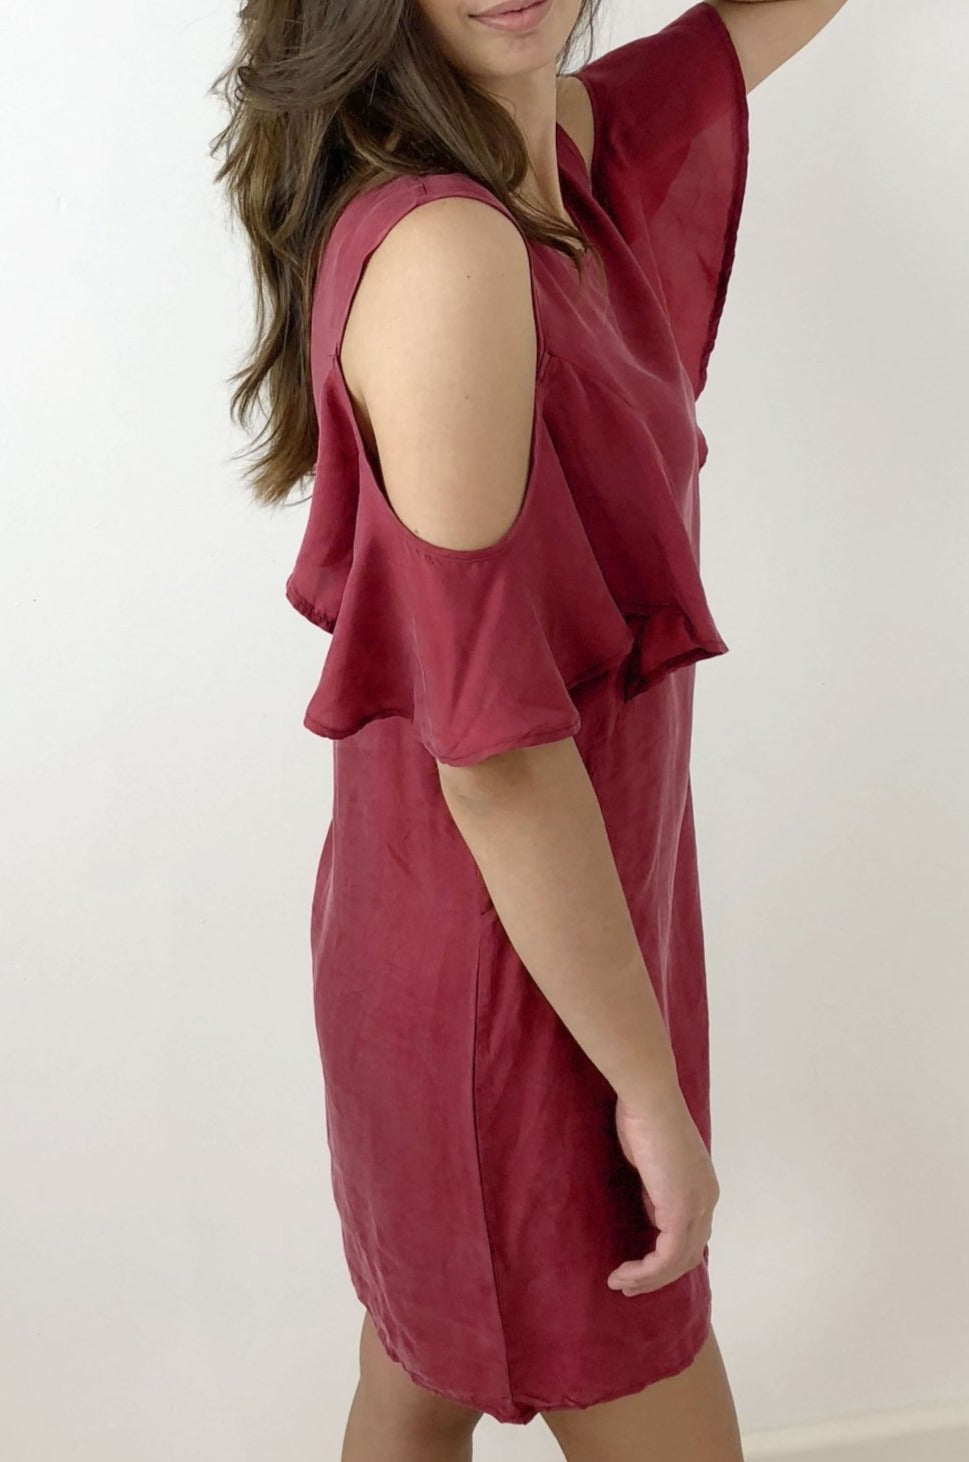 Fate + Becker Darinna Cold Shoulder Dress in Strawberry Size 8 and 12 ONLY - Hey Sara